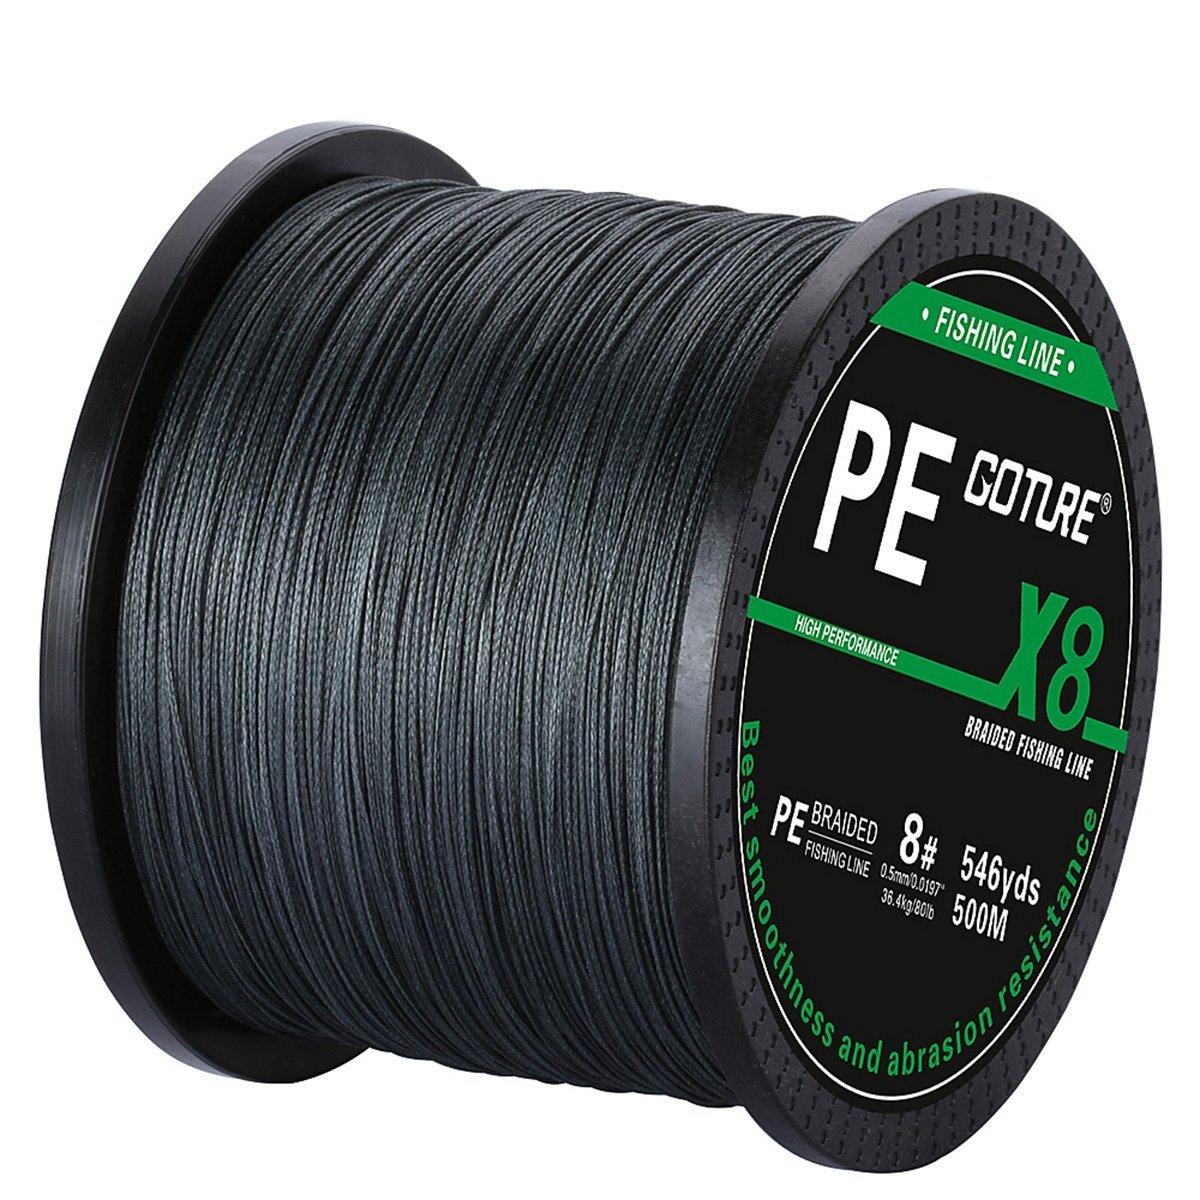 Goture Super Strength Braided Fishing Line - Abrasion Resistant - No Stretch & Low Memory - Thin Diameter - 4 Strand 8 Strand Braided Line, 164